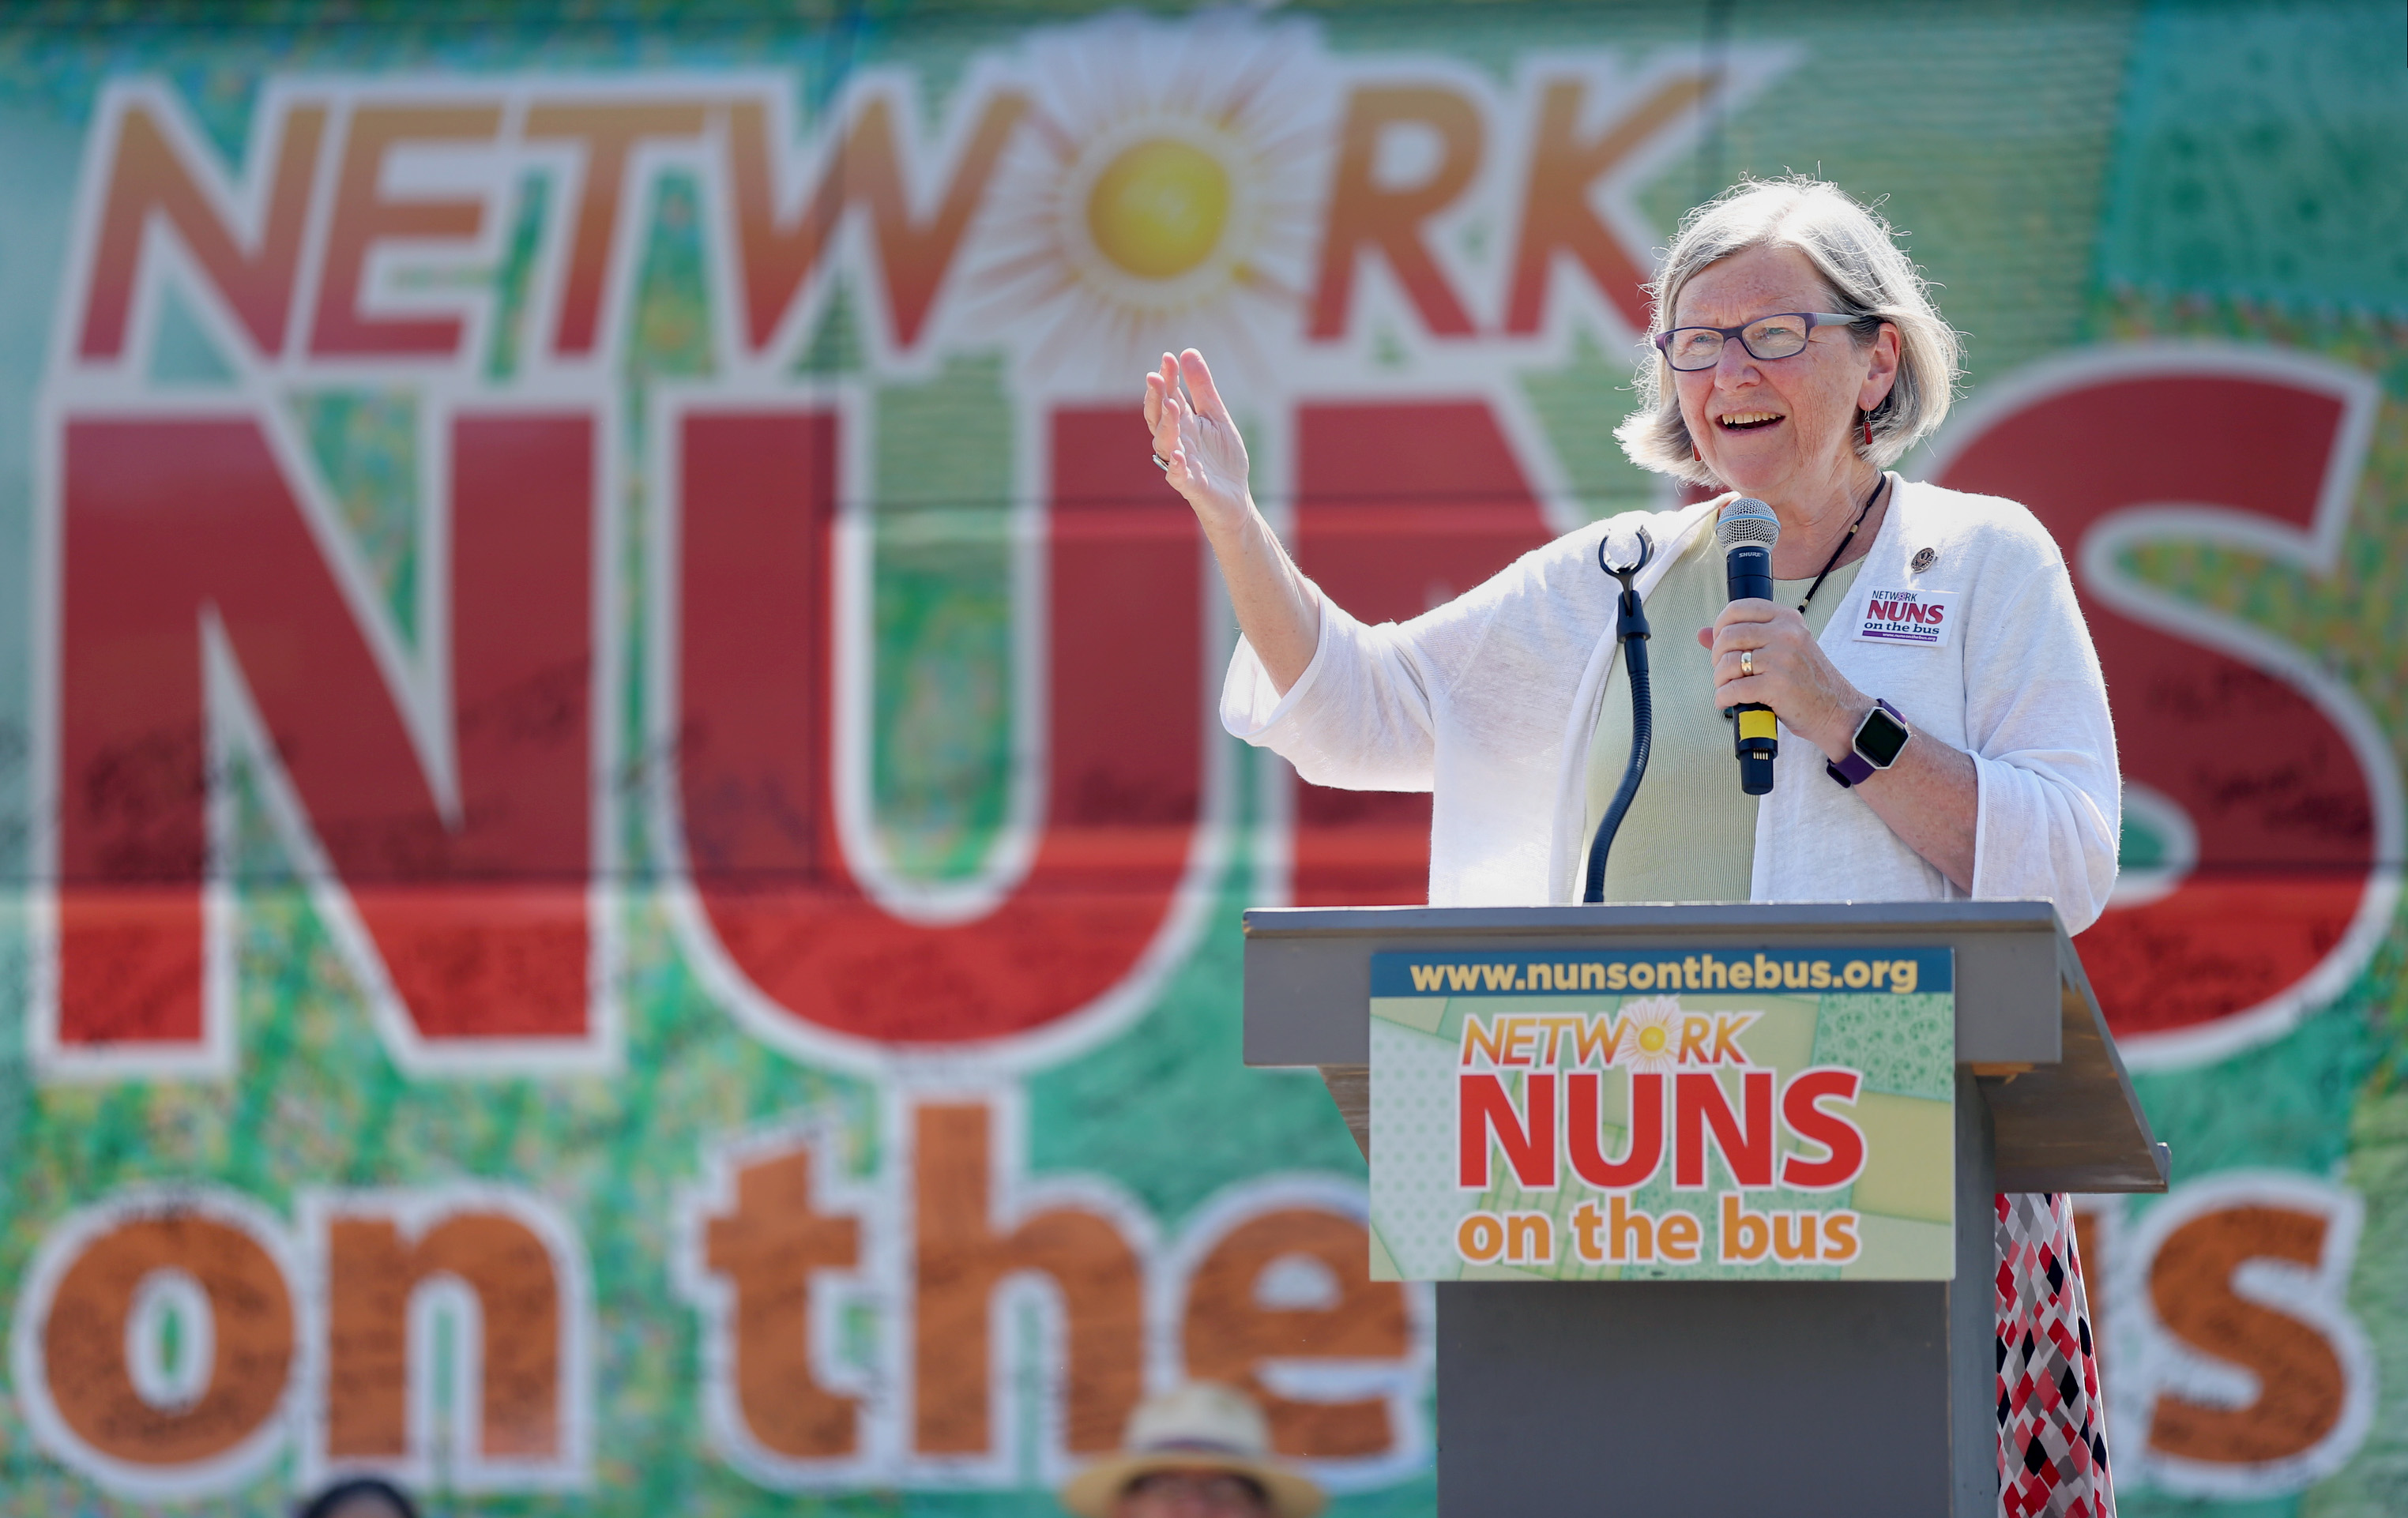 Sister Simone Campbell, leader of the Nuns on the Bus, speaks during a stop at Boston College High School, July 23, 2016. (Boston Globe via Getty Images)